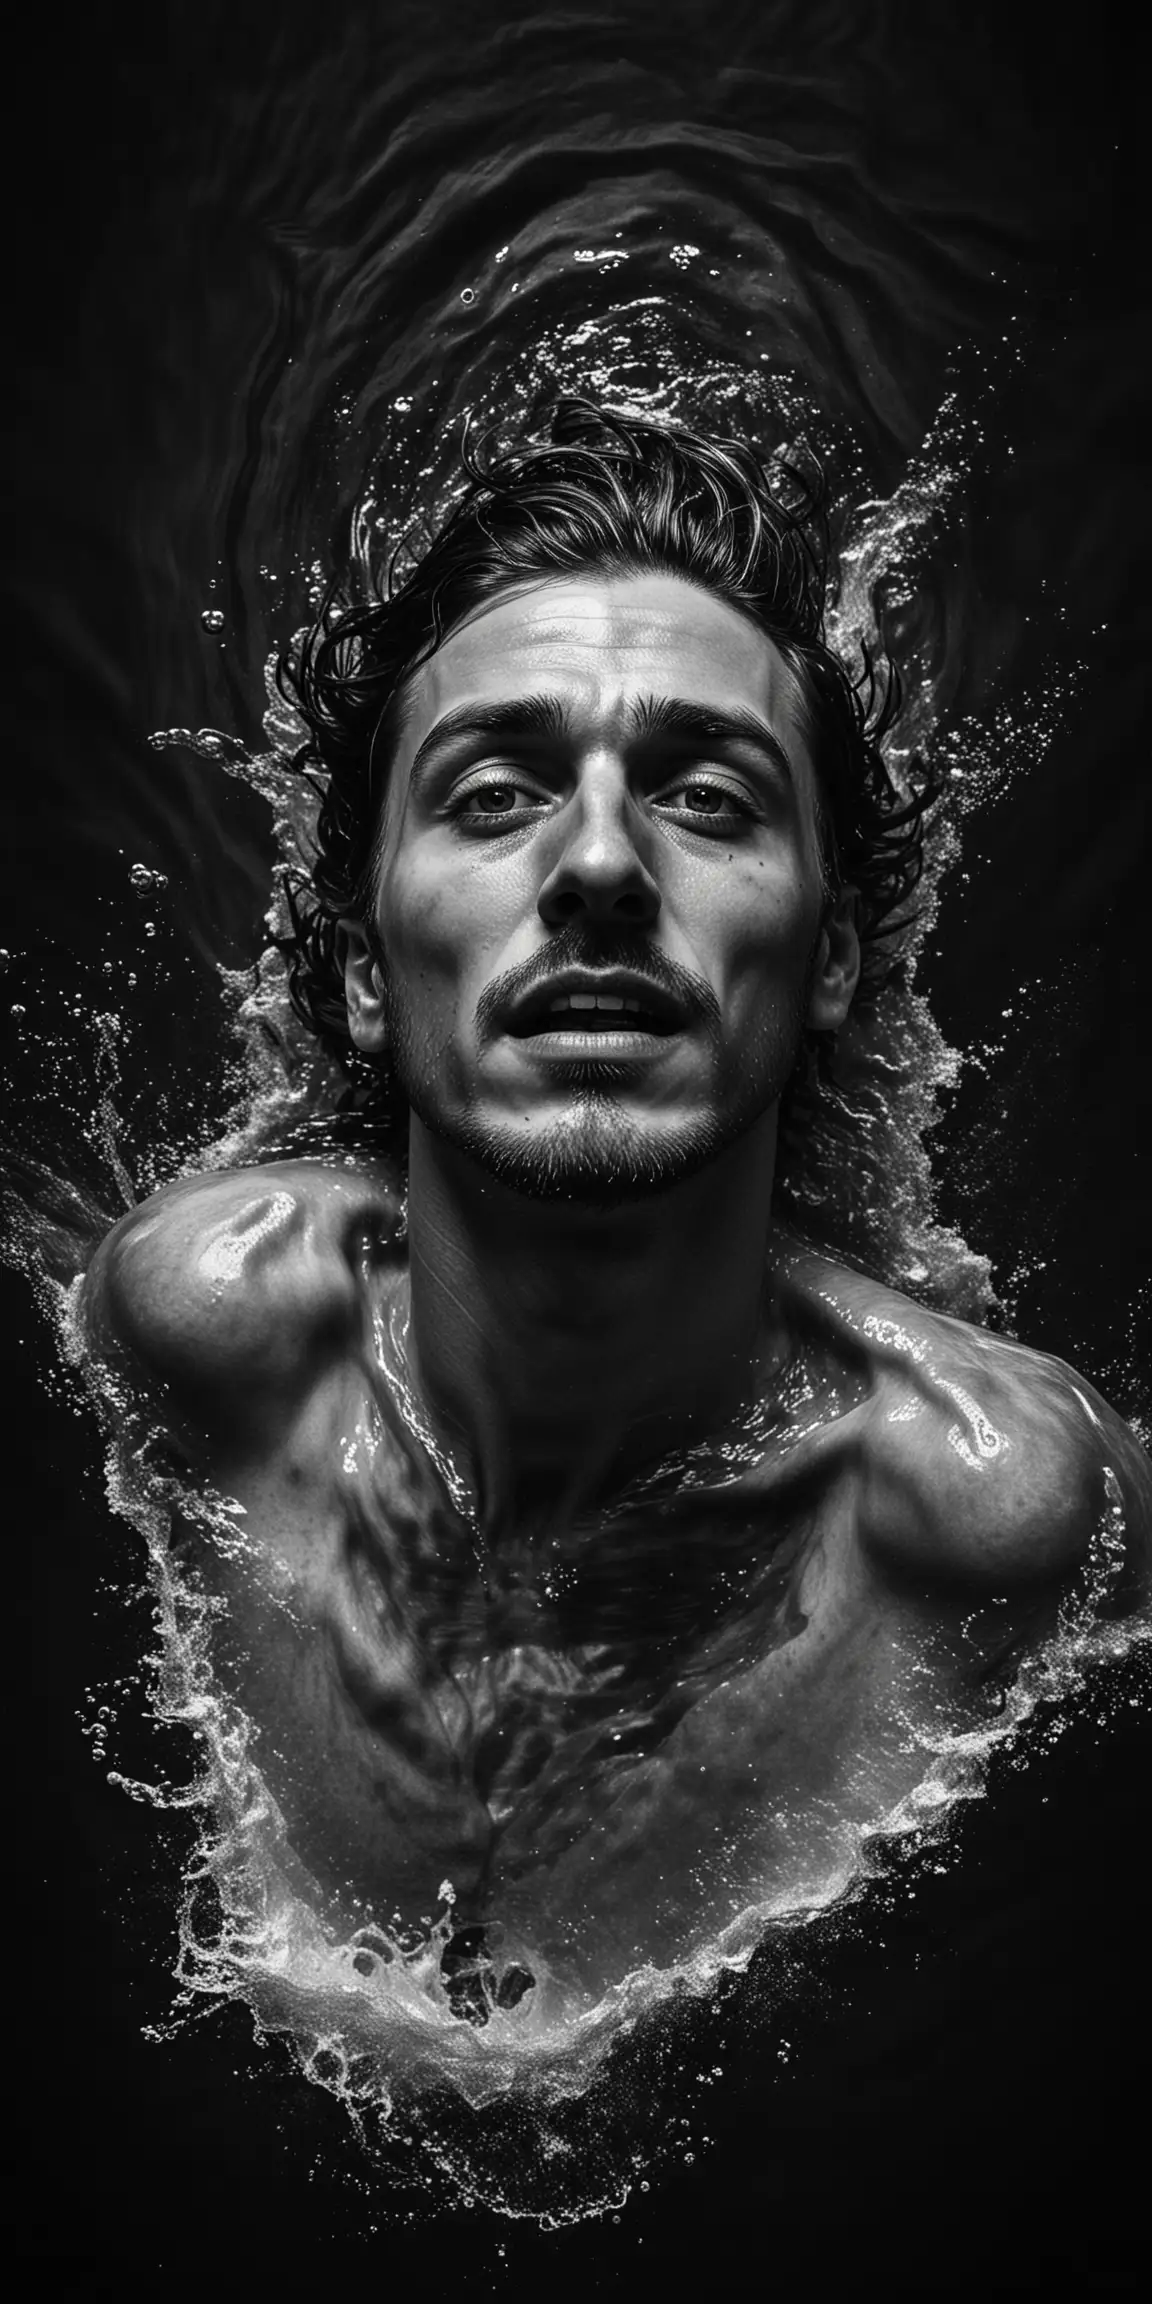 Drowning Man in Distorted Portrait Haunting Black and White Photo